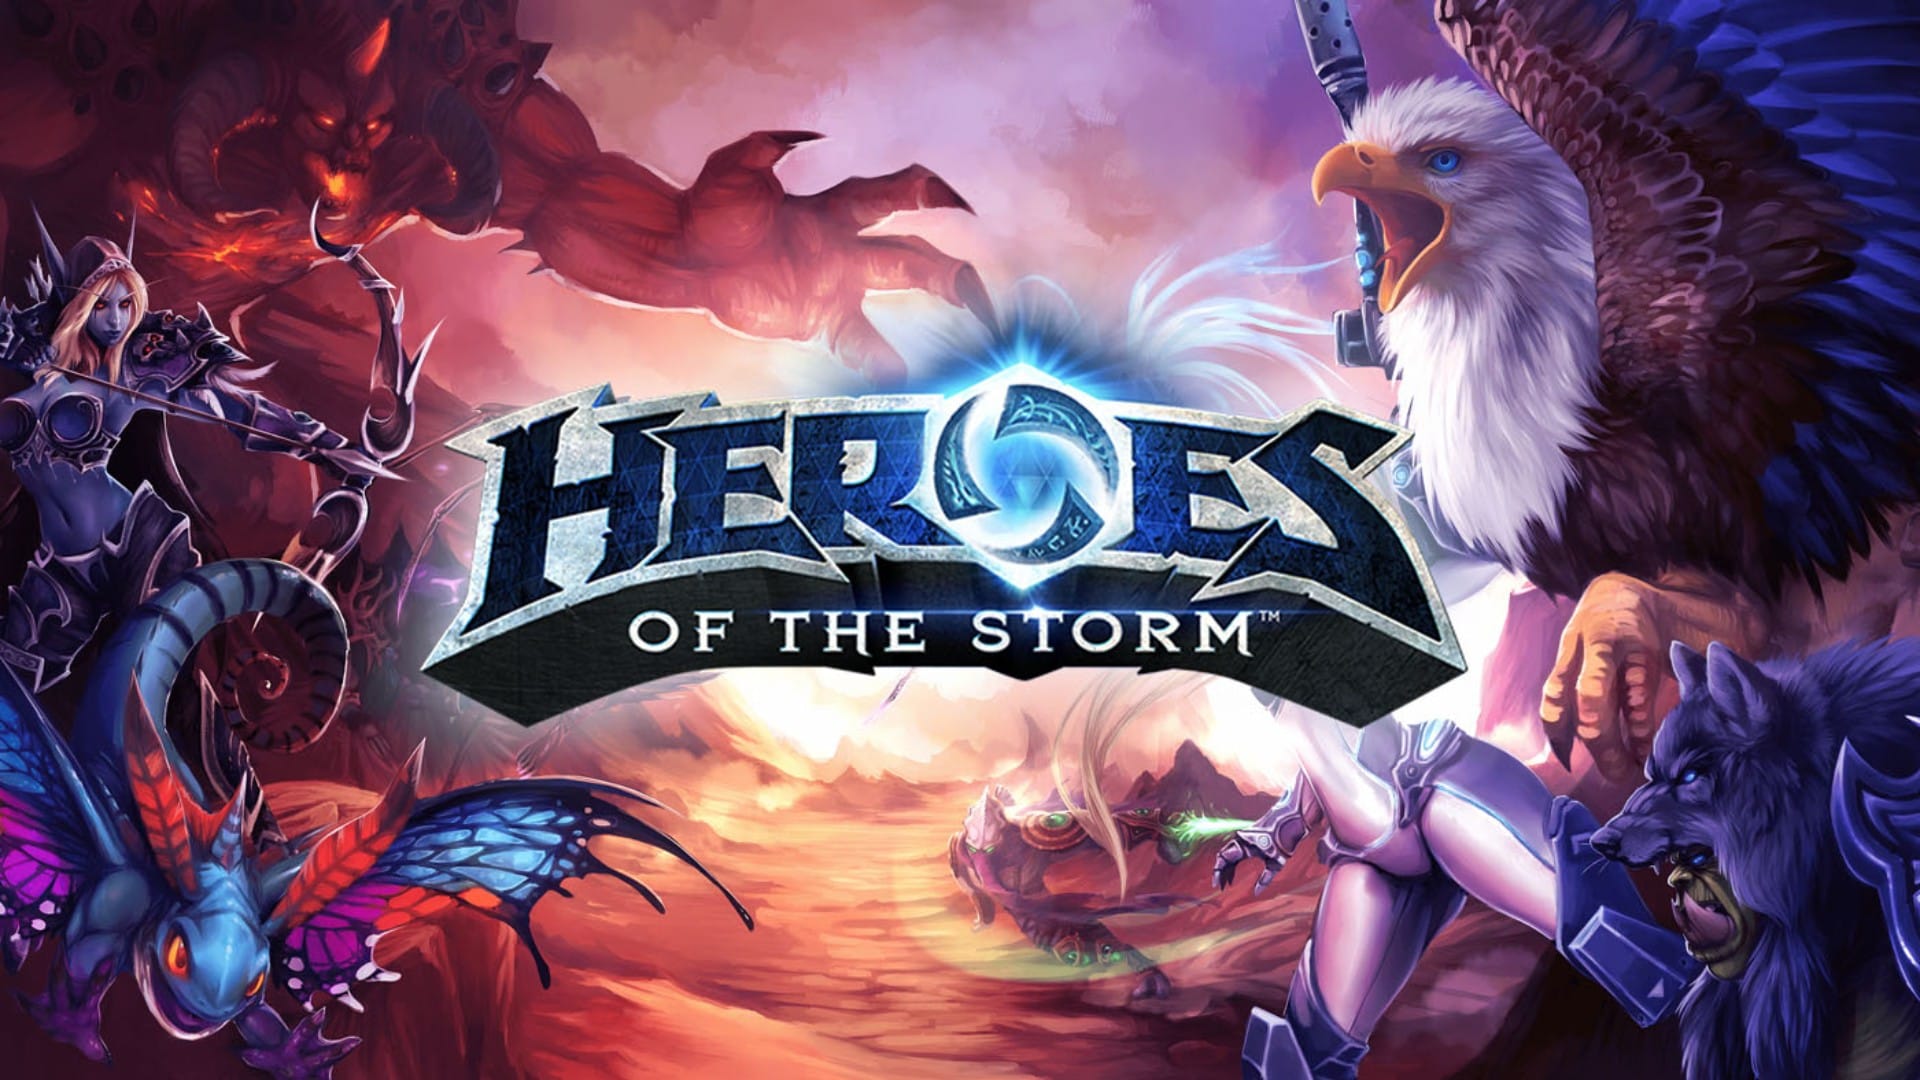 Heroes of the Storm pros react to Blizzard canceling HotS esports - Polygon